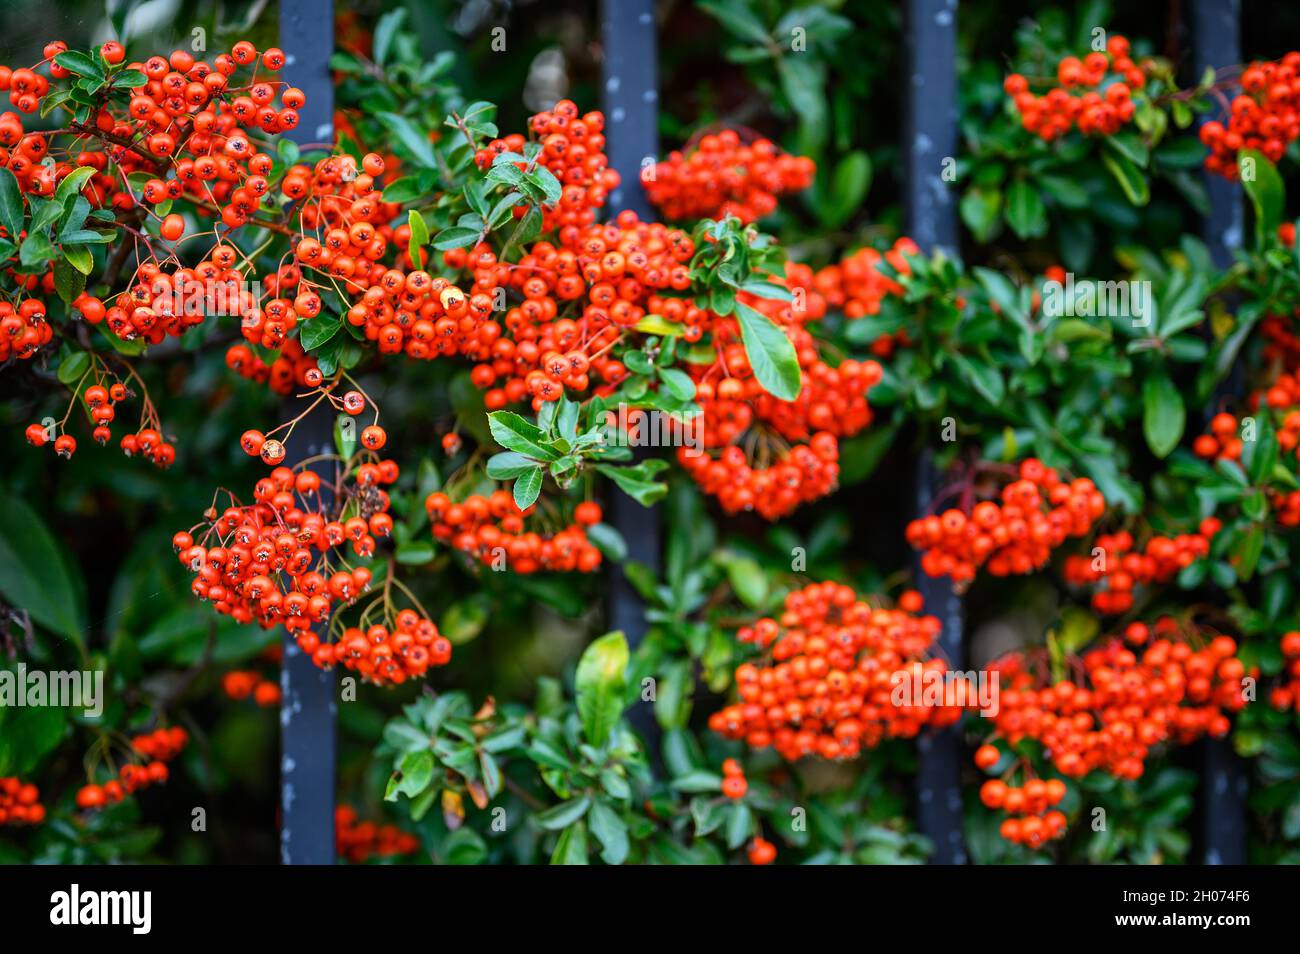 Hawthorn hedge with red hawthorn berries and black railings. This hawthorn hedge forms the boundary to a front garden. Stock Photo